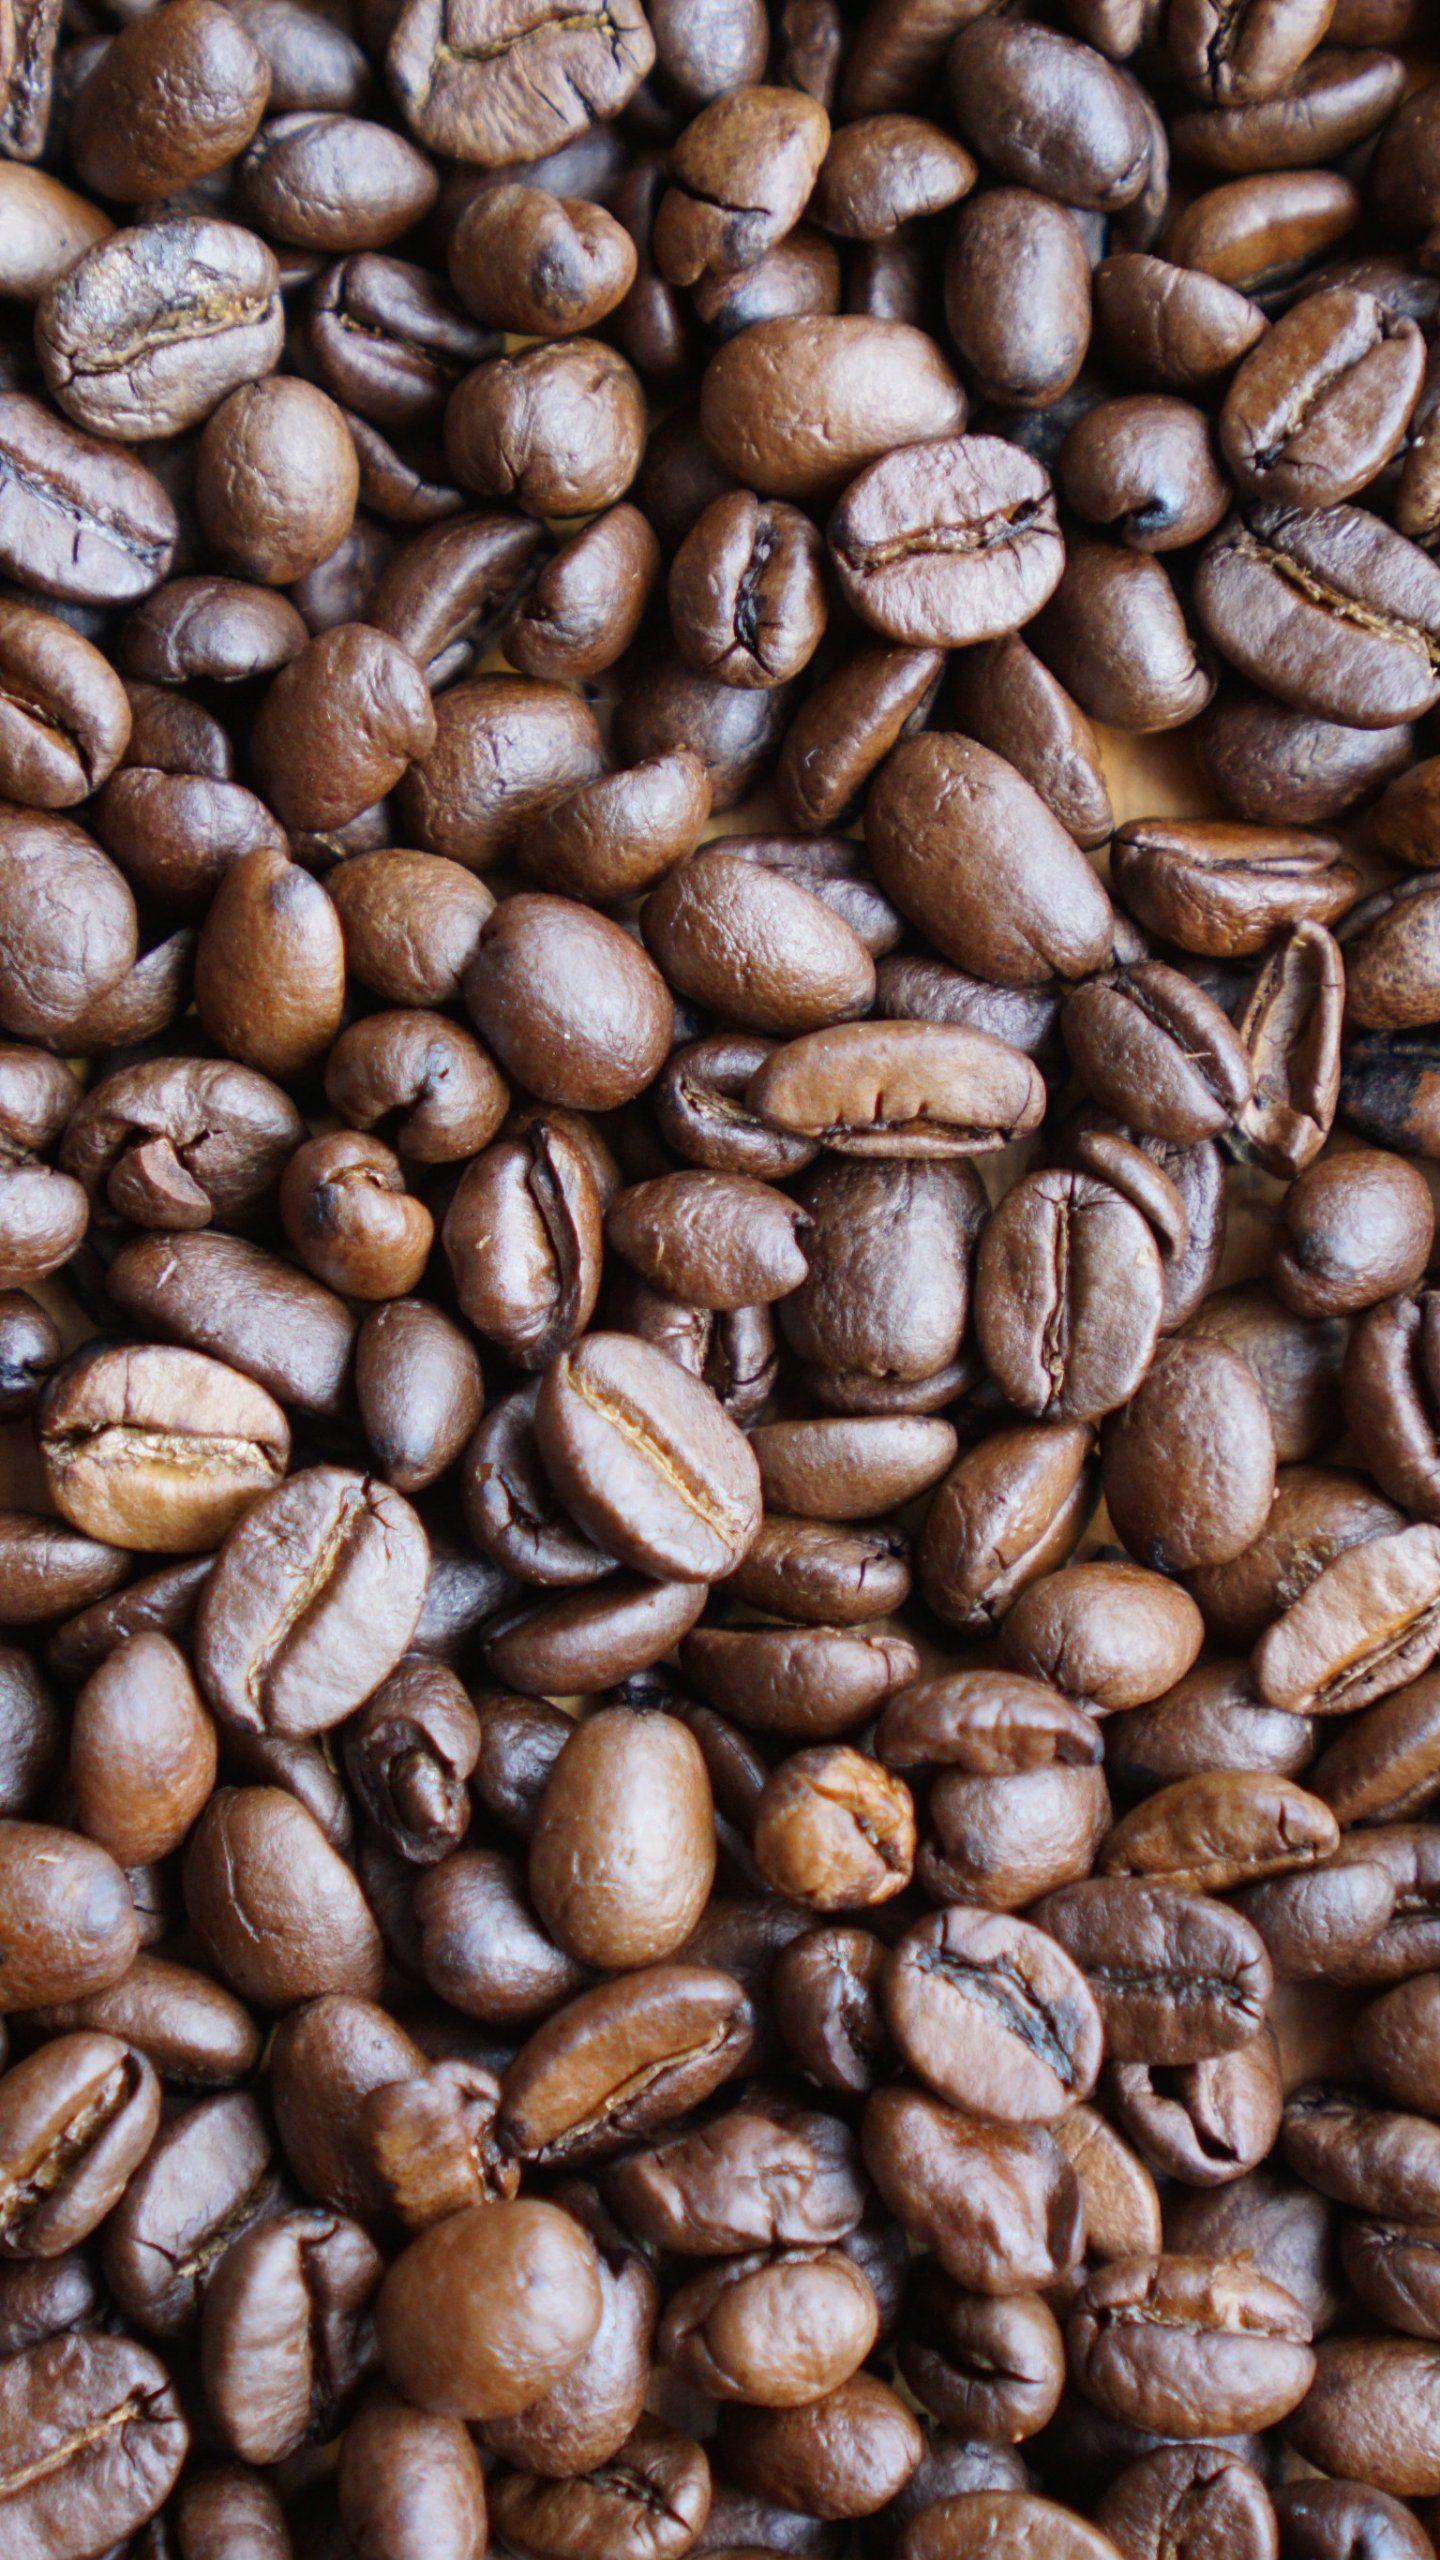 1440x2560 Coffee Beans Wallpaper - iPhone, Android & Desktop Background